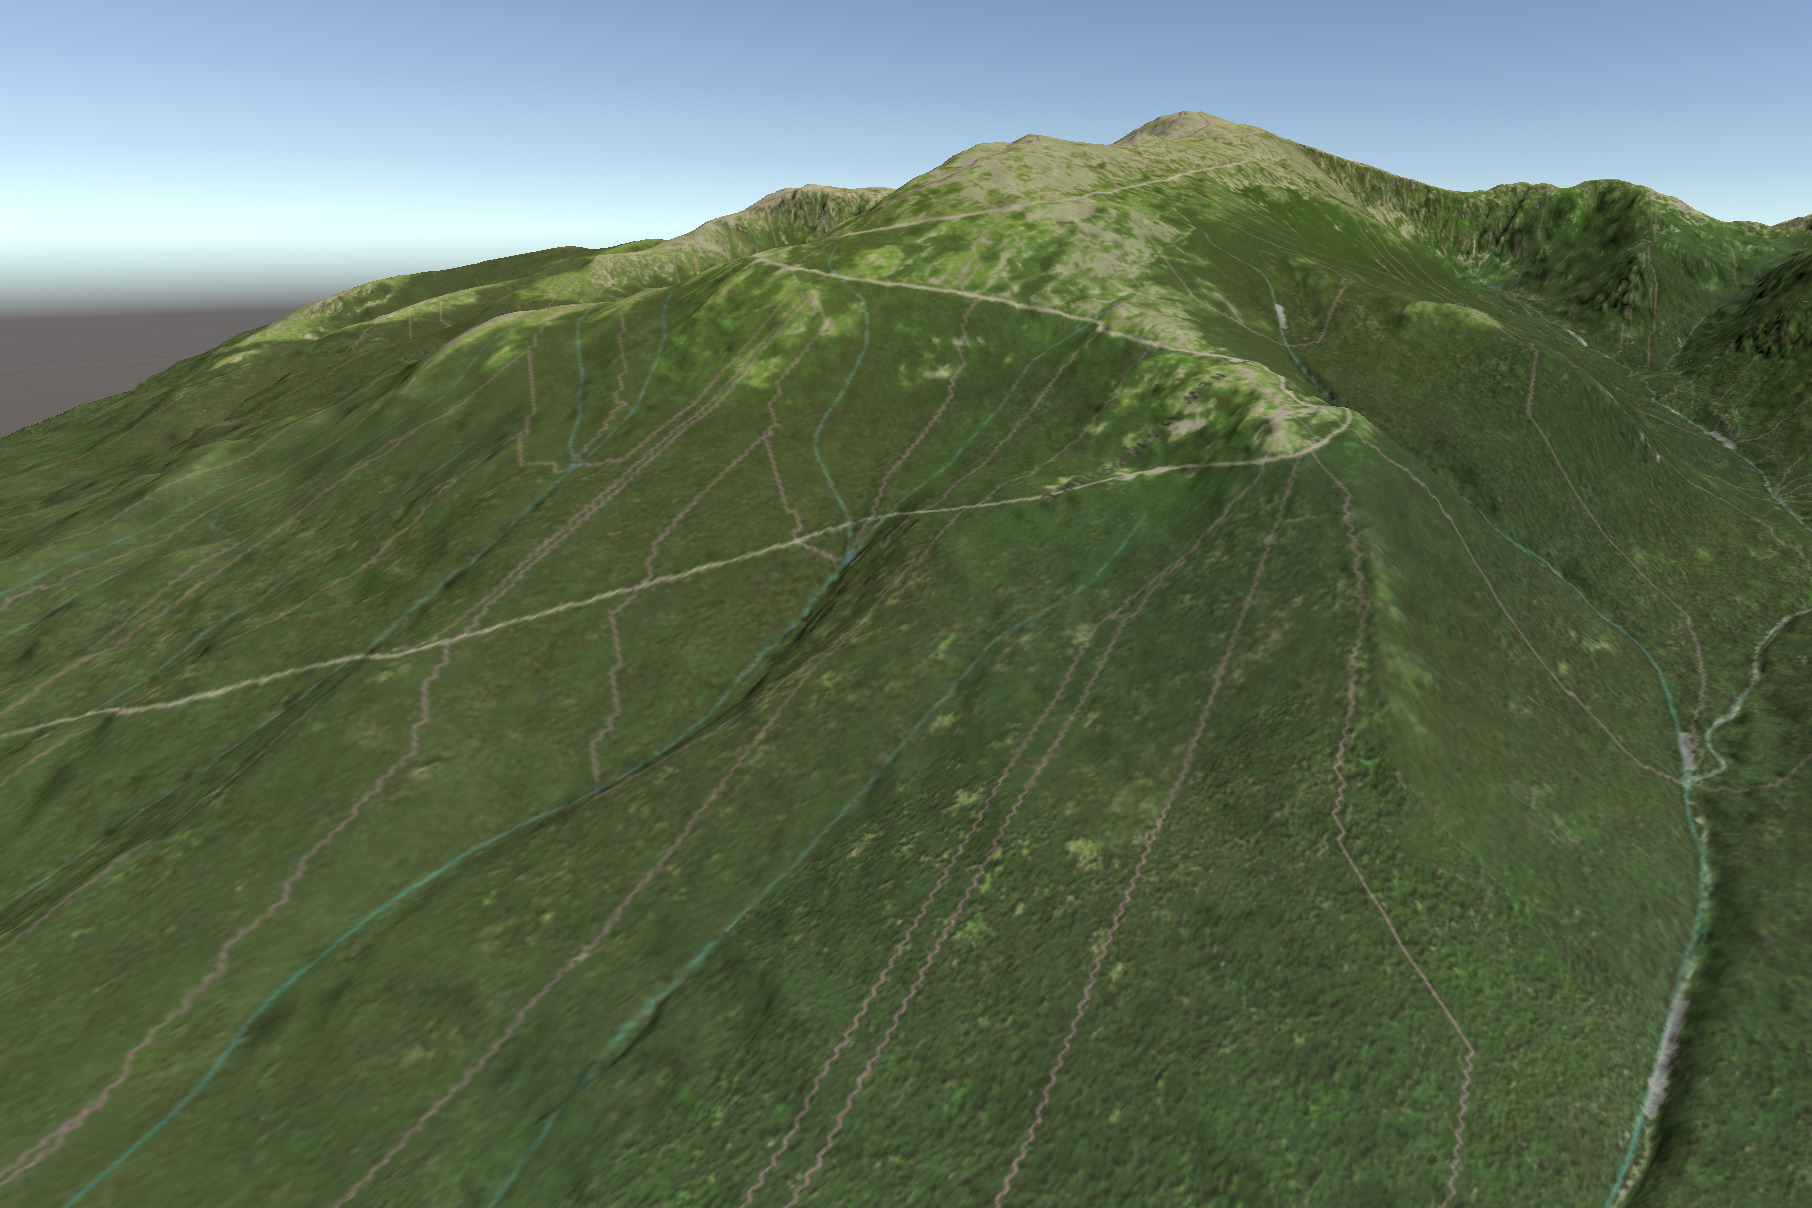 A 3D rendering of the summit of Mt. Washington, including watershed boundaries and river lines.